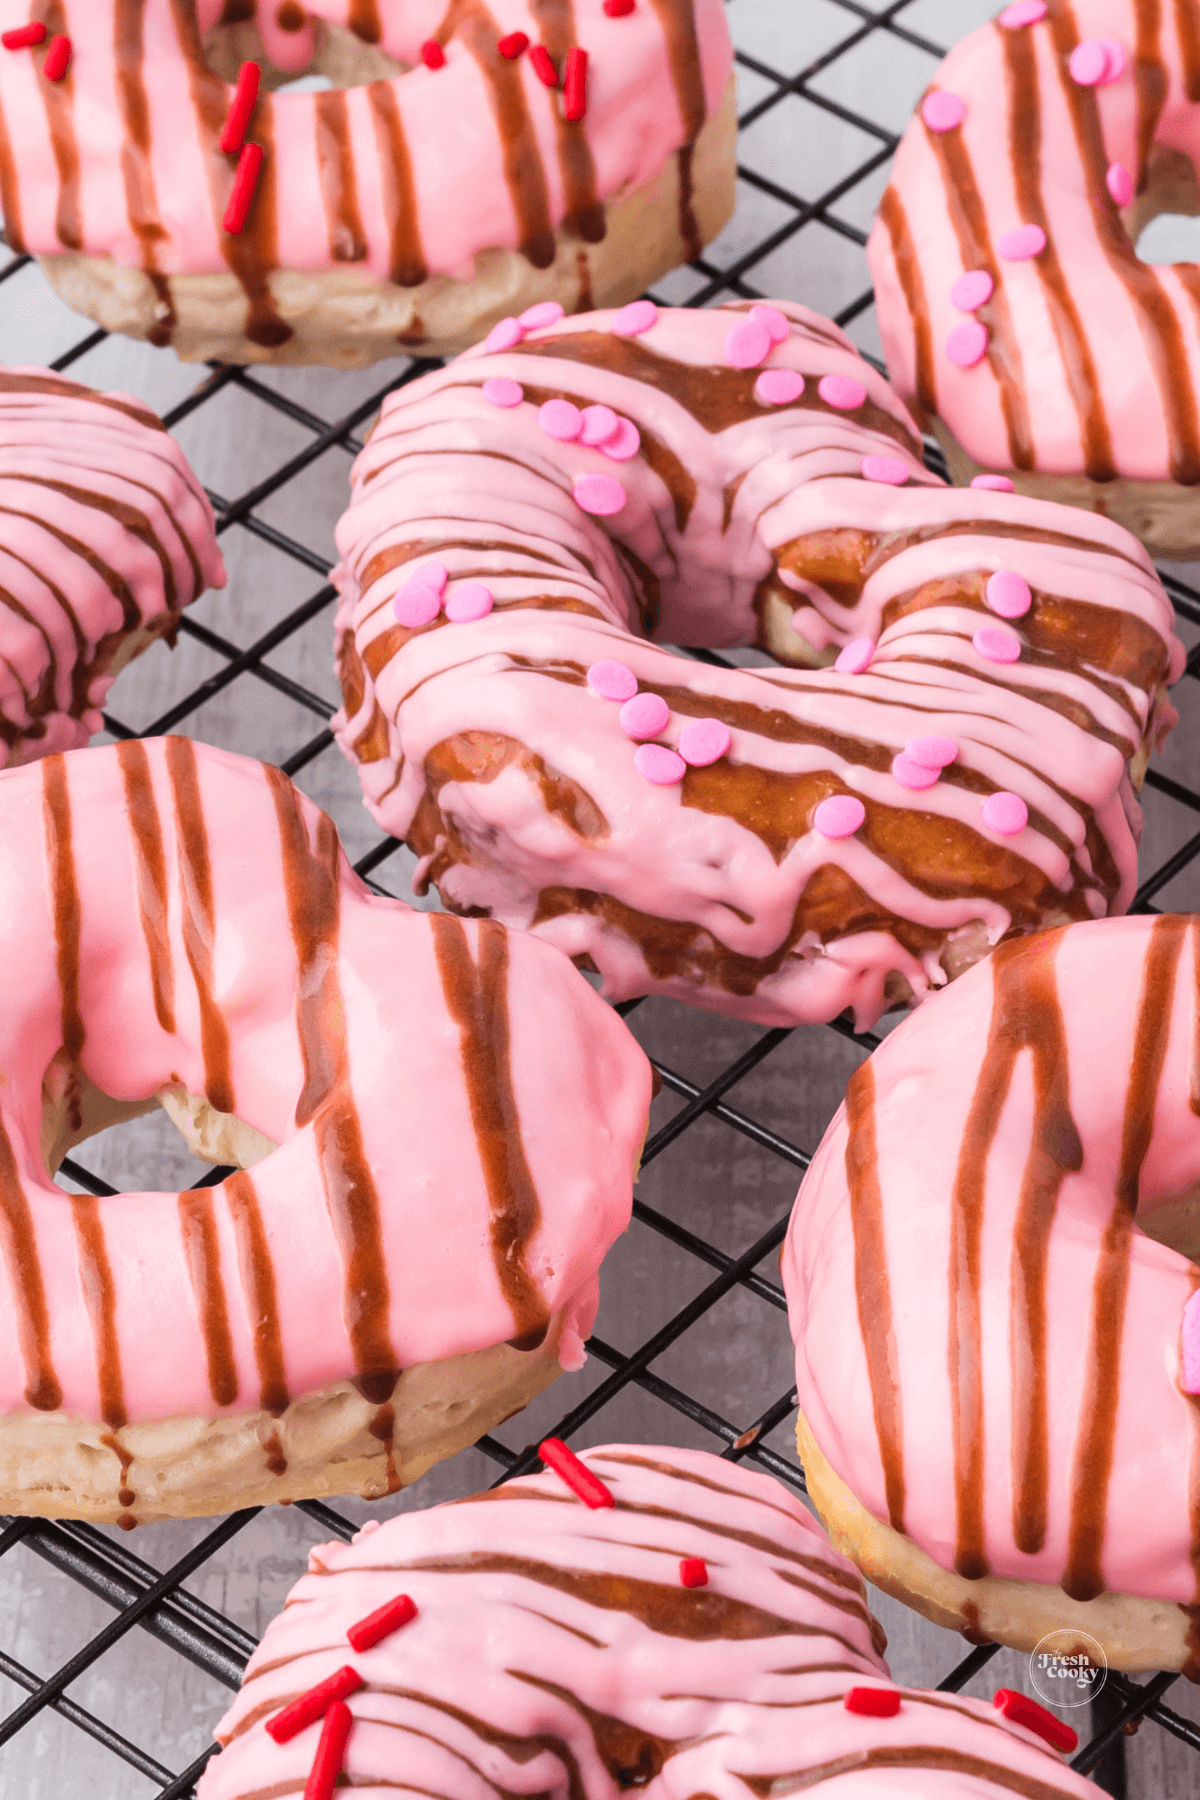 Air fryer biscuit donuts on rack heart shaped.